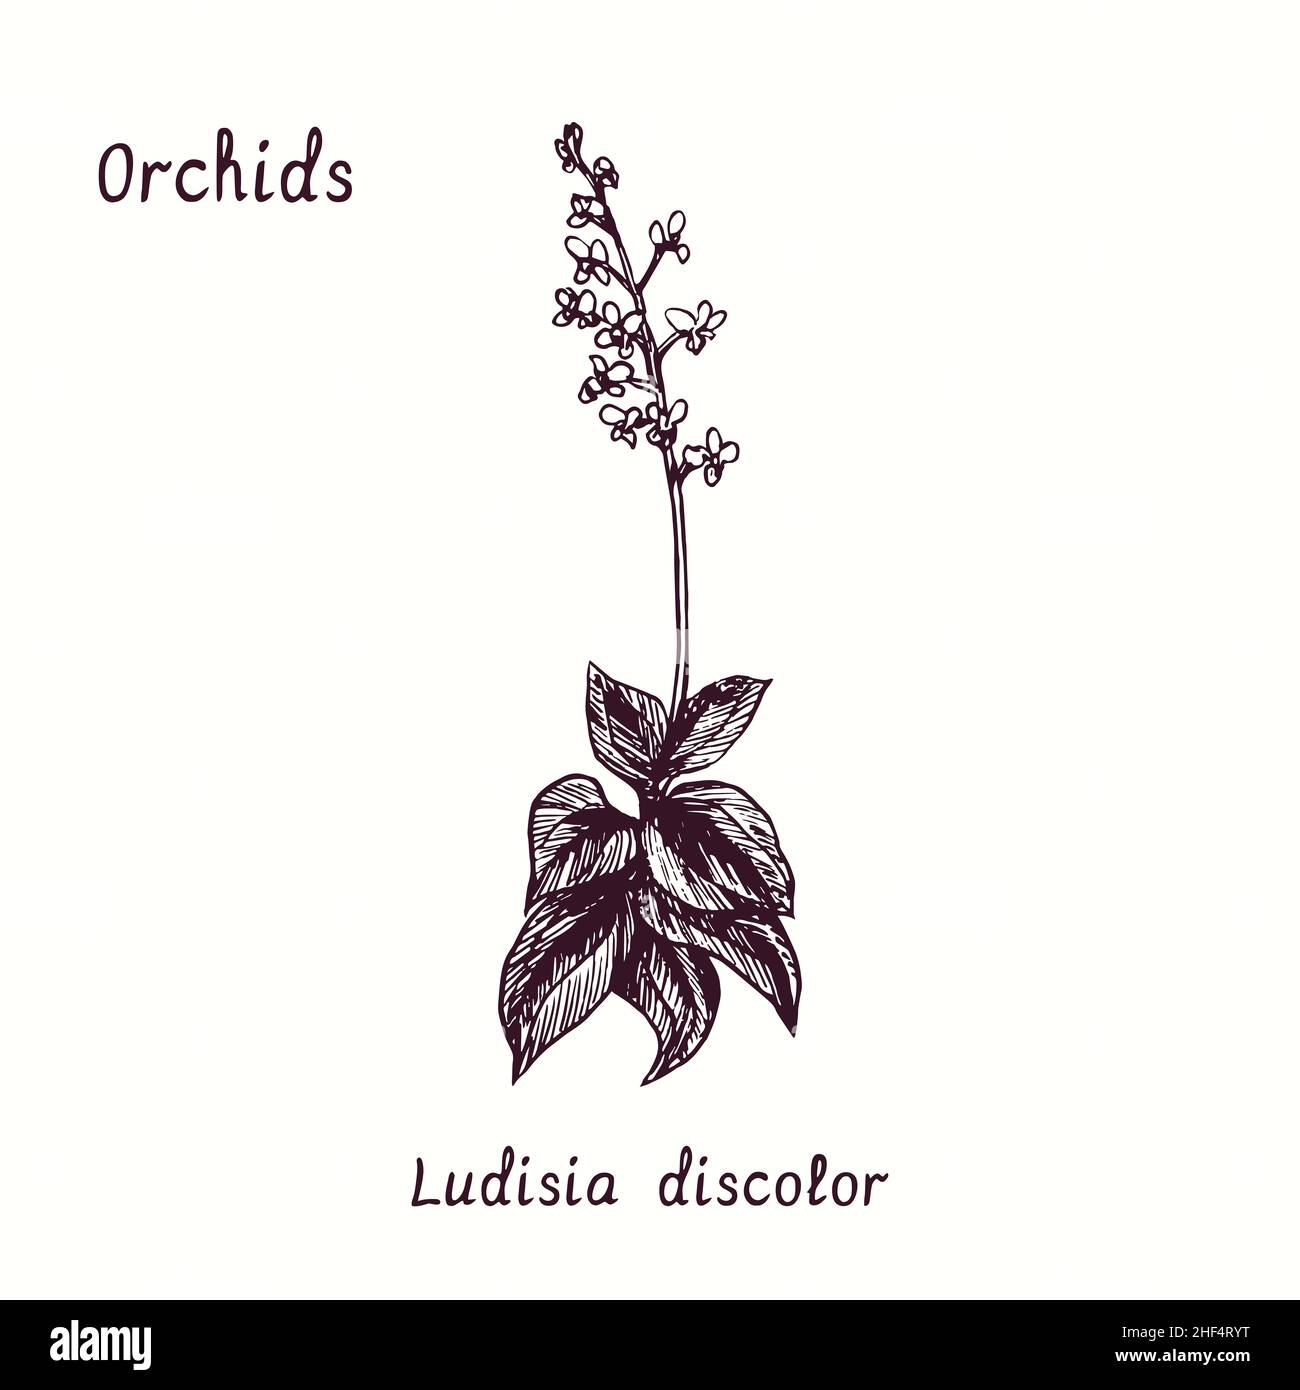 Ludisia discolor (Jewel Orchid) orchids flower collection. Ink black and white doodle drawing in woodcut style with inscription. Stock Photo